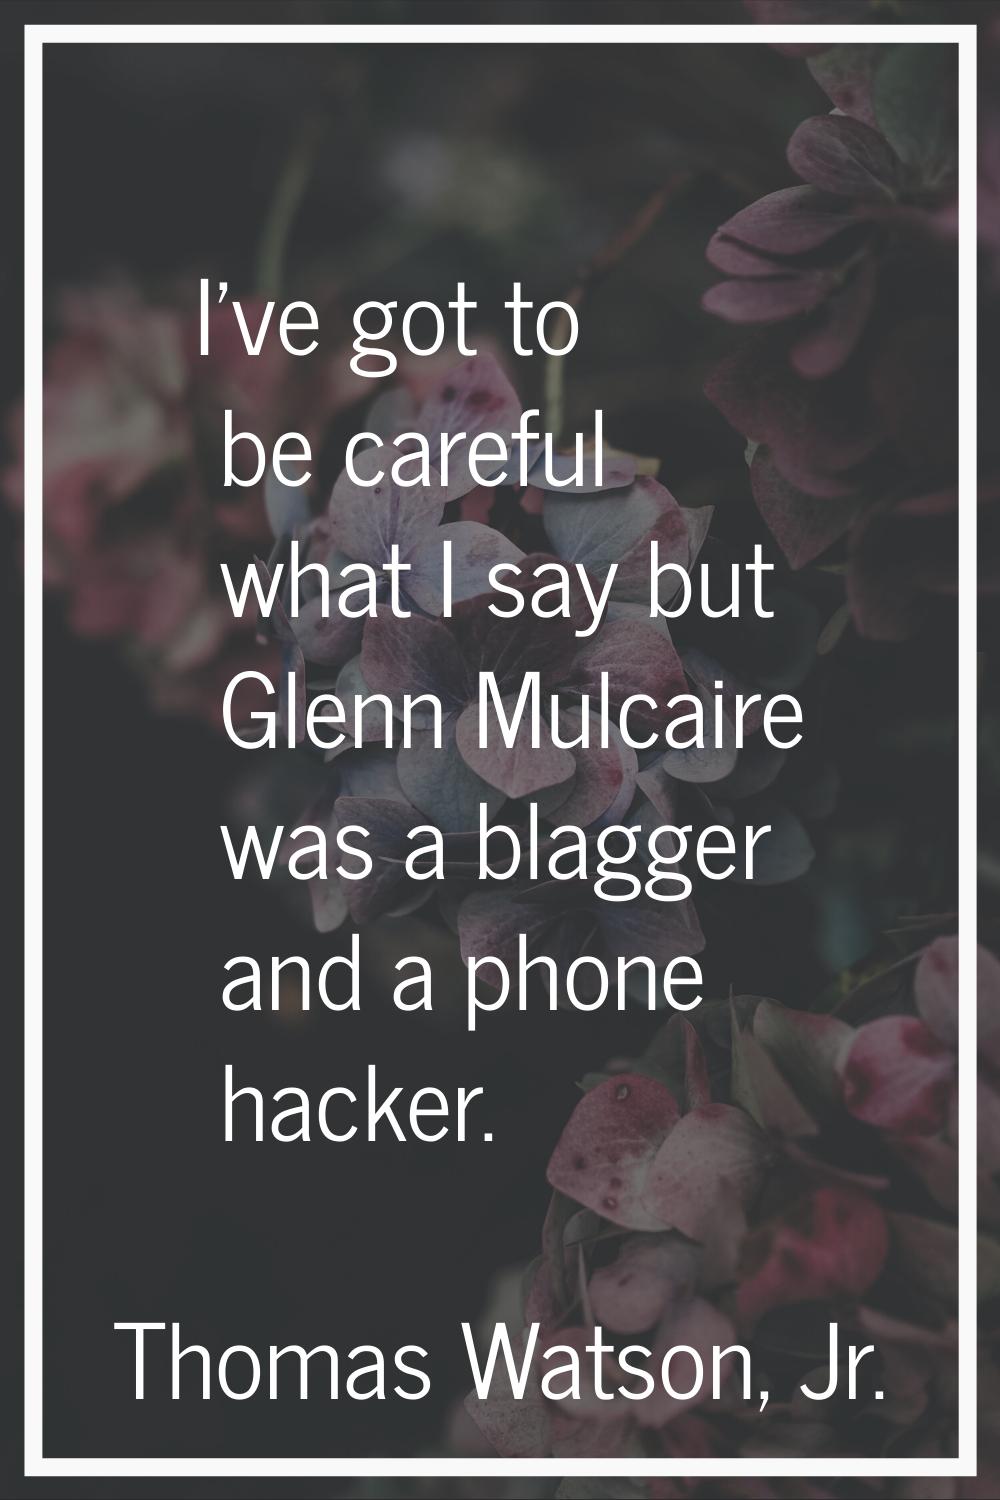 I've got to be careful what I say but Glenn Mulcaire was a blagger and a phone hacker.